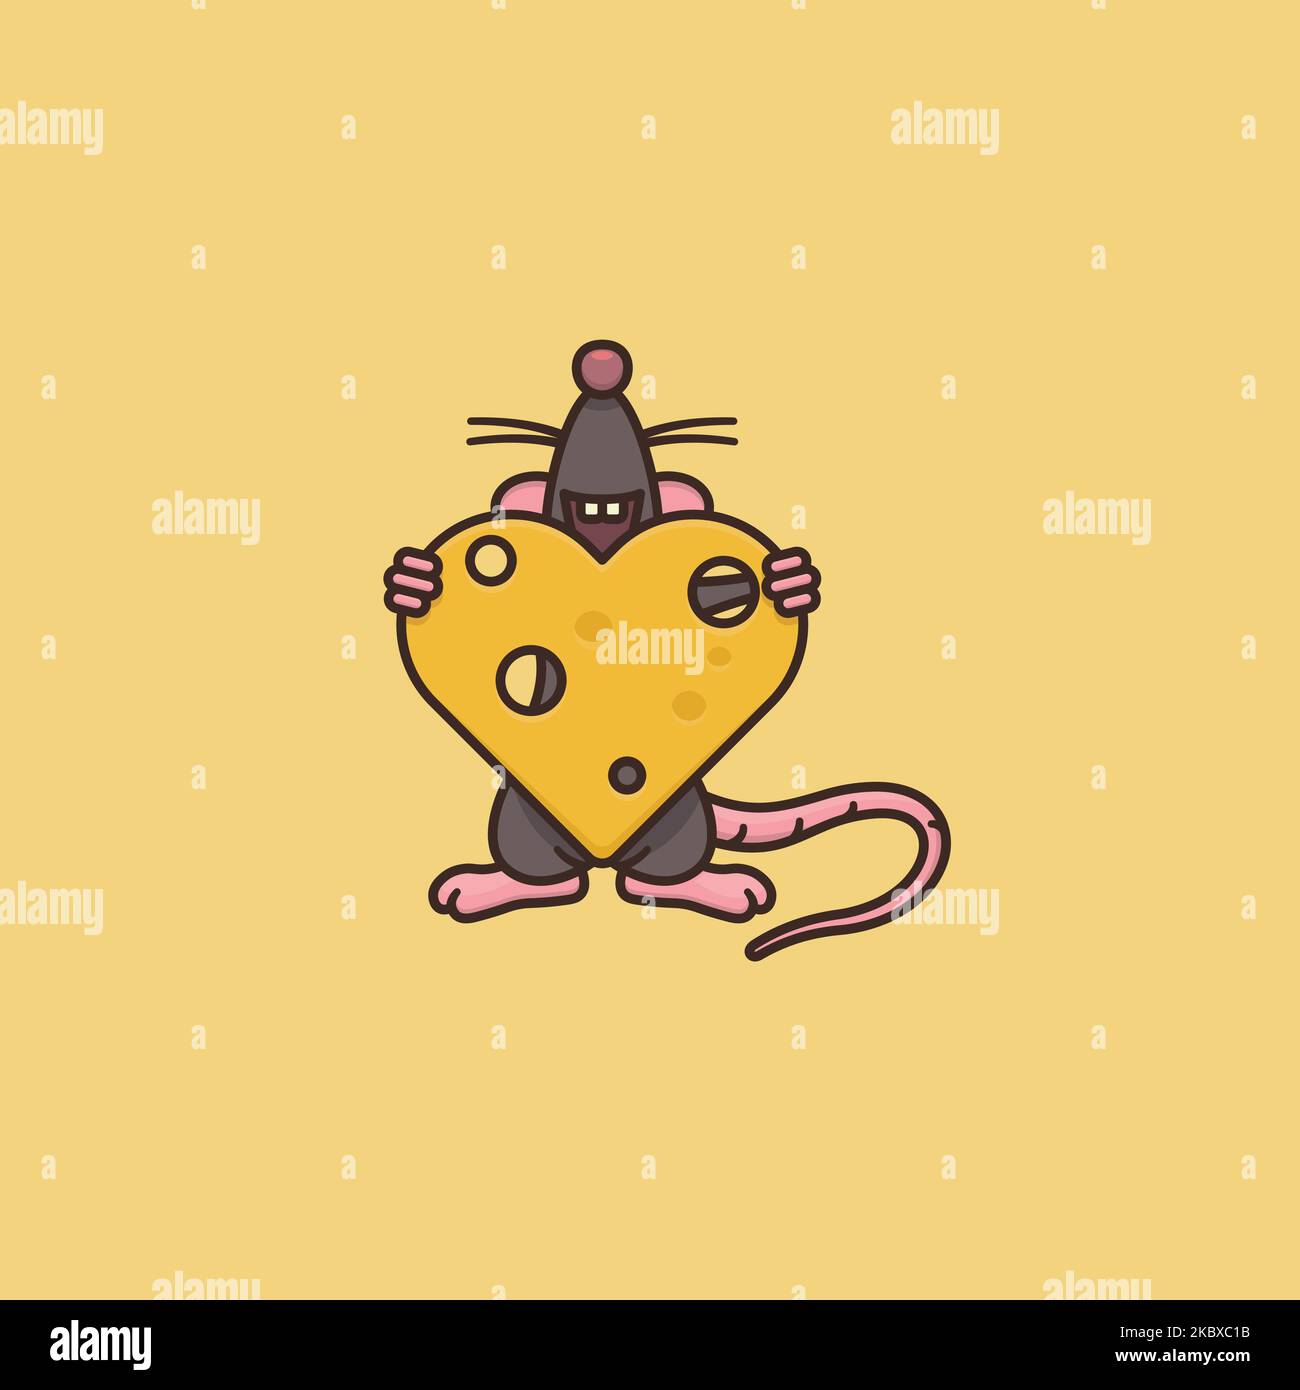 Mouses with cheese house in garden cartoon Vector Image